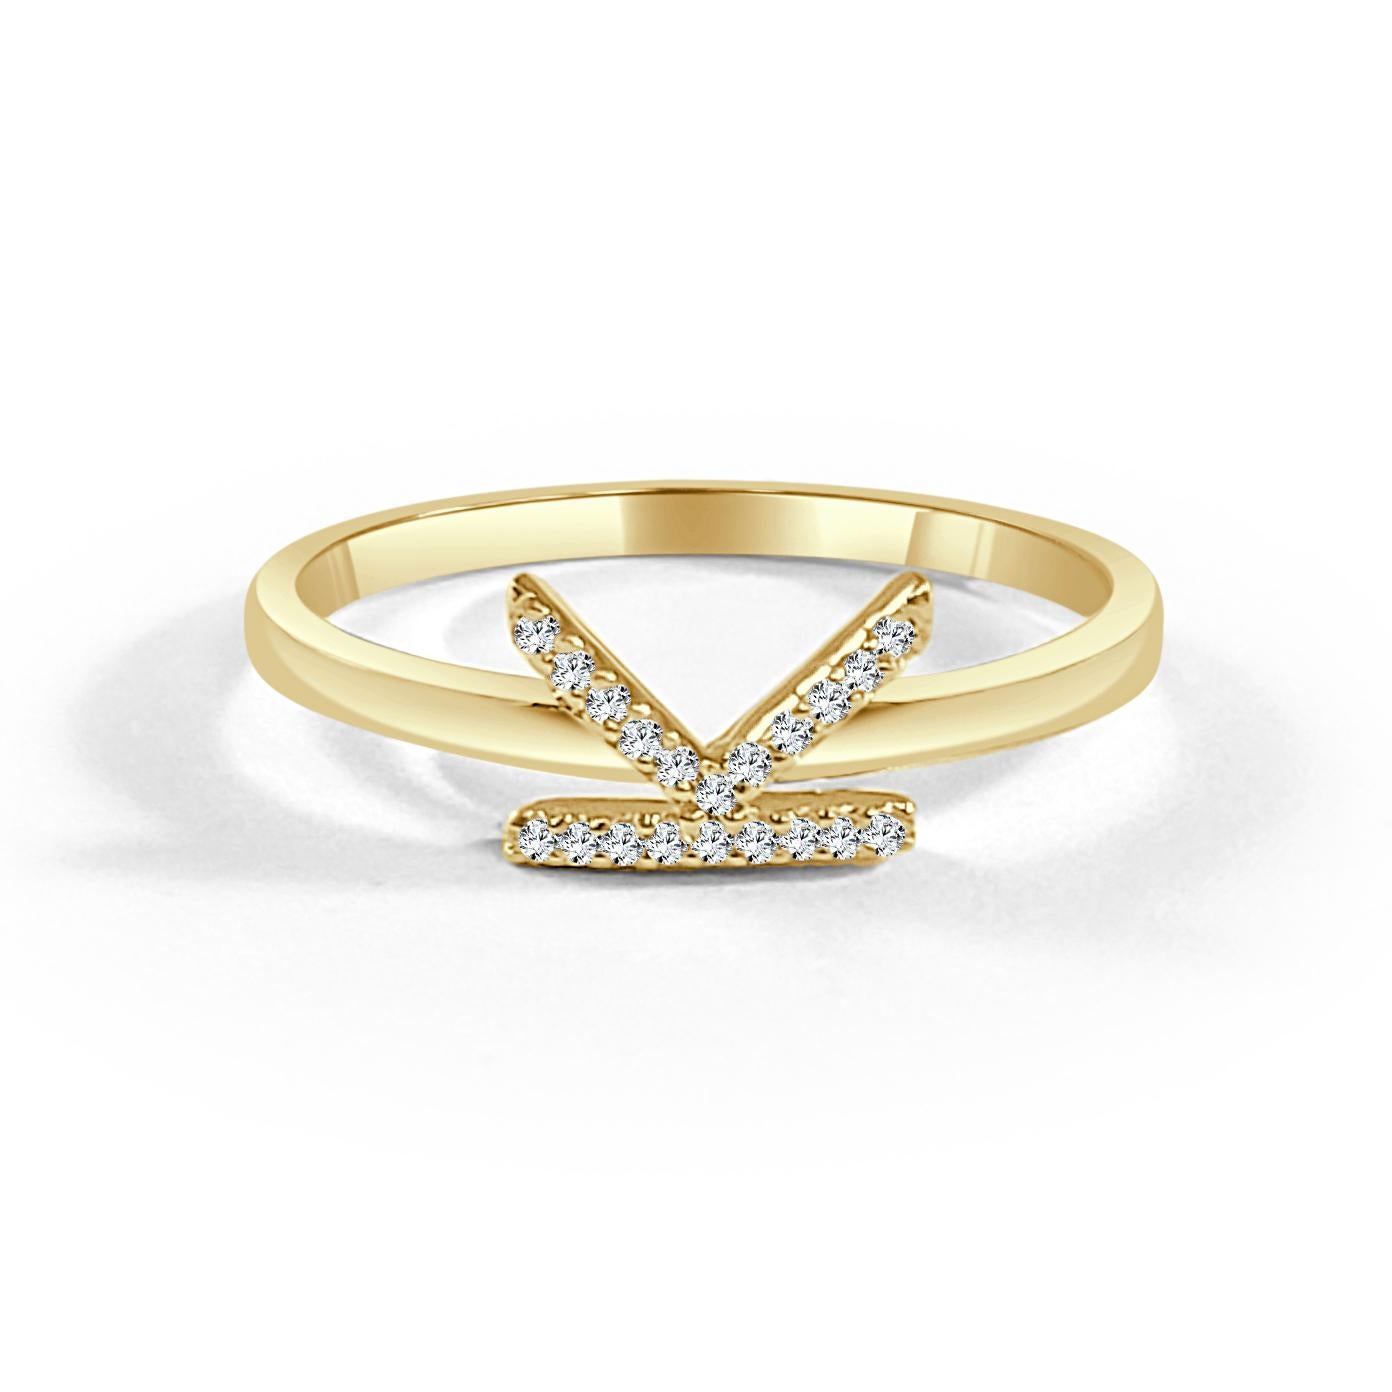 Alphabet Initial Ring: Beautiful gold ring perfectly size 7 in with round diamonds between 0.06 ct - 0.10, allowing you to show off your name, new last name or alma mater. This ring can also be sized up or down with your local jeweler. Custom sizing